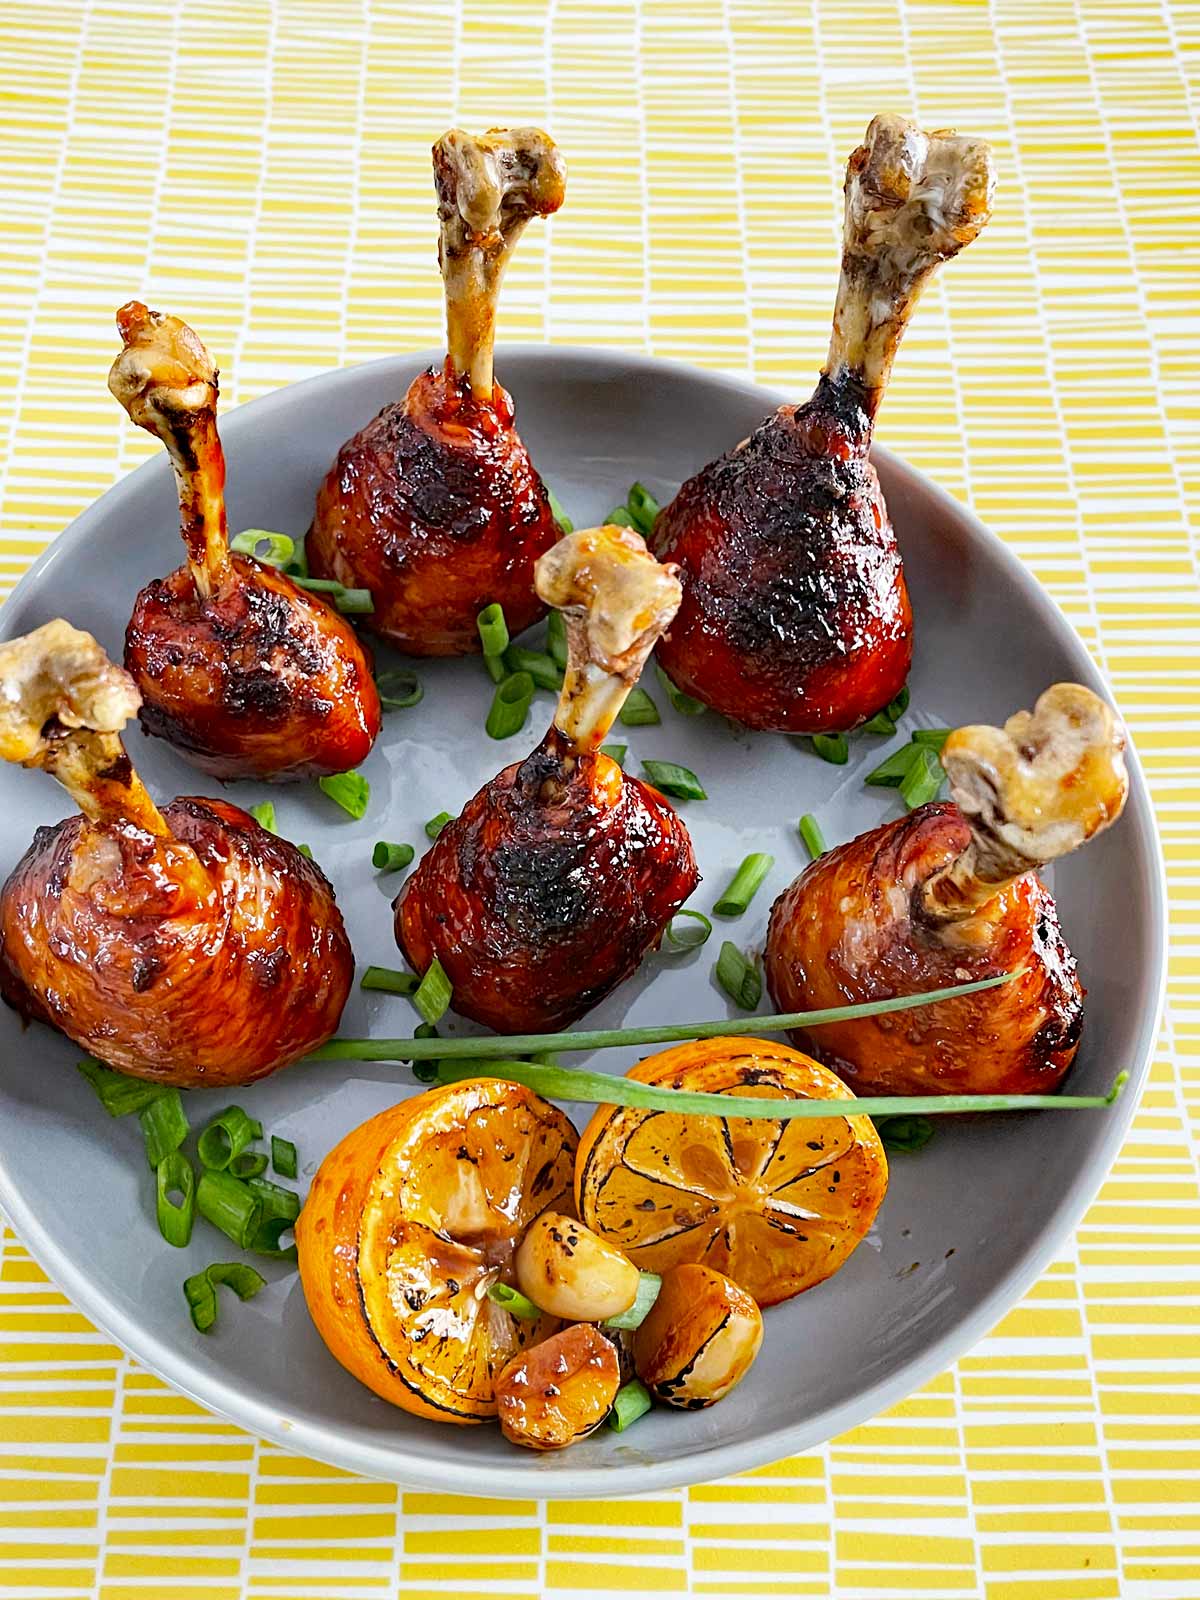 Six chicken drumsticks with glaze and prepared to expose the bone.